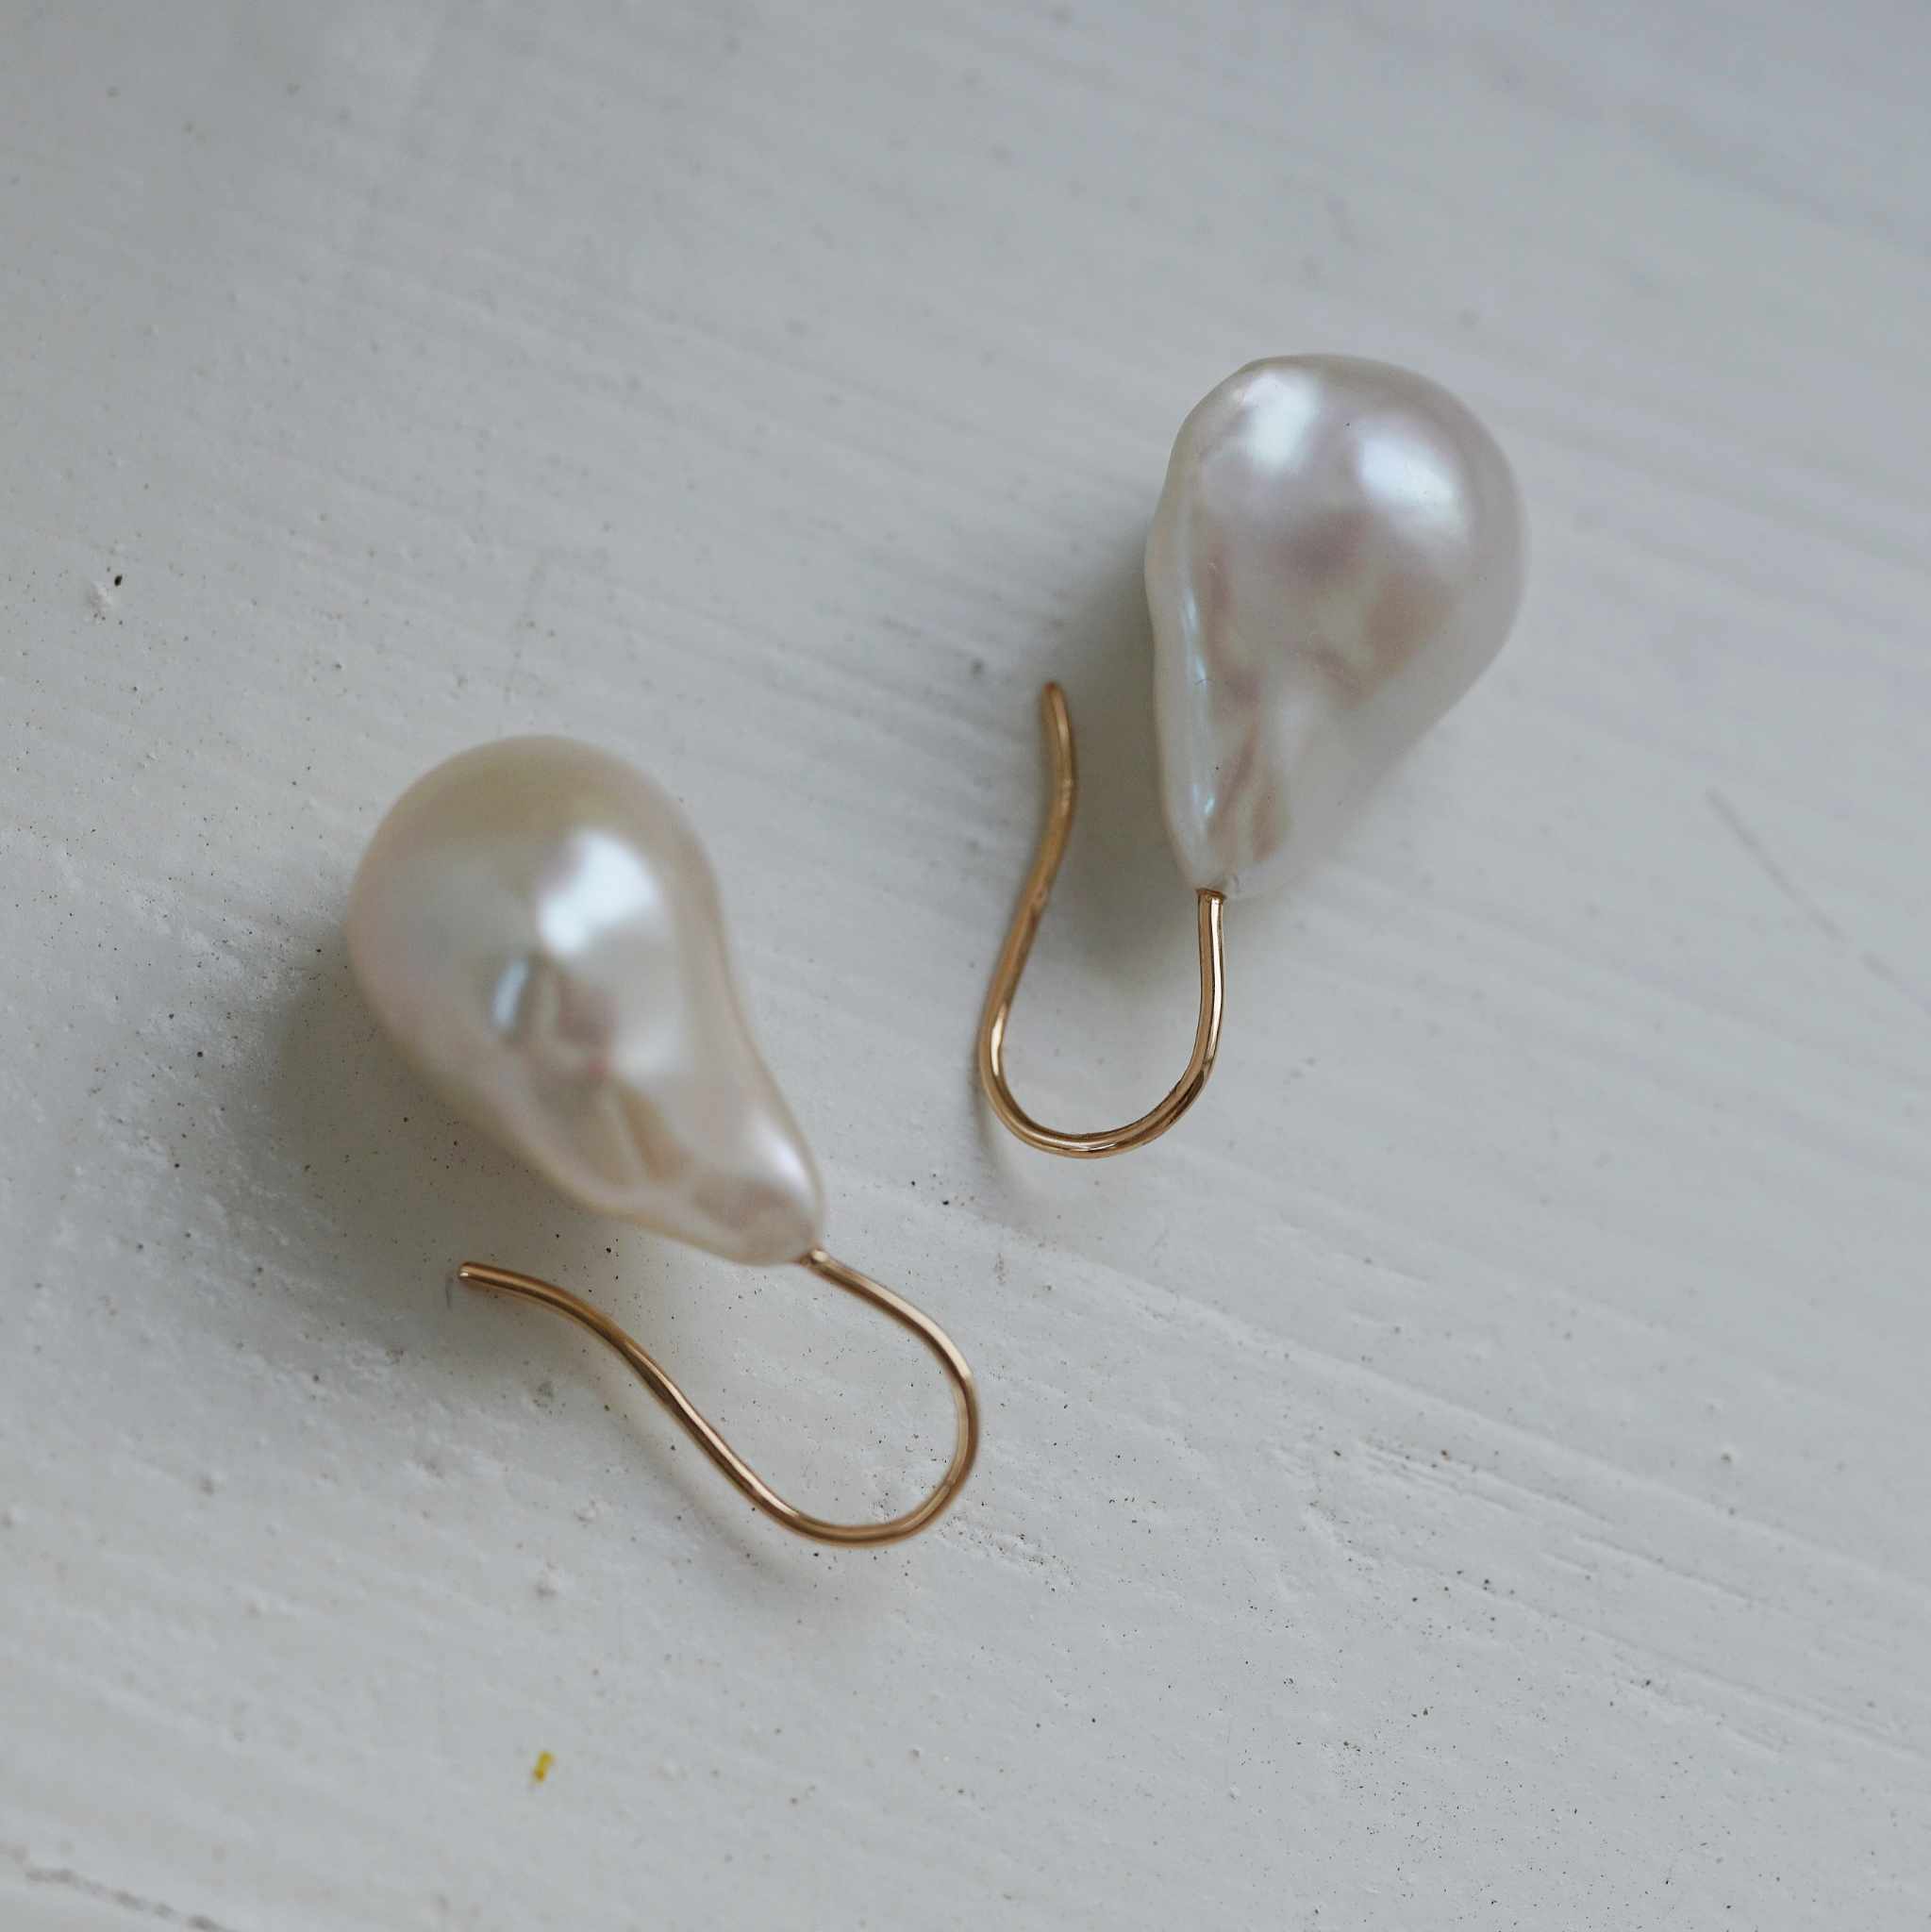 "Pearl drop" earrings in gold with baroque freshwater pearls